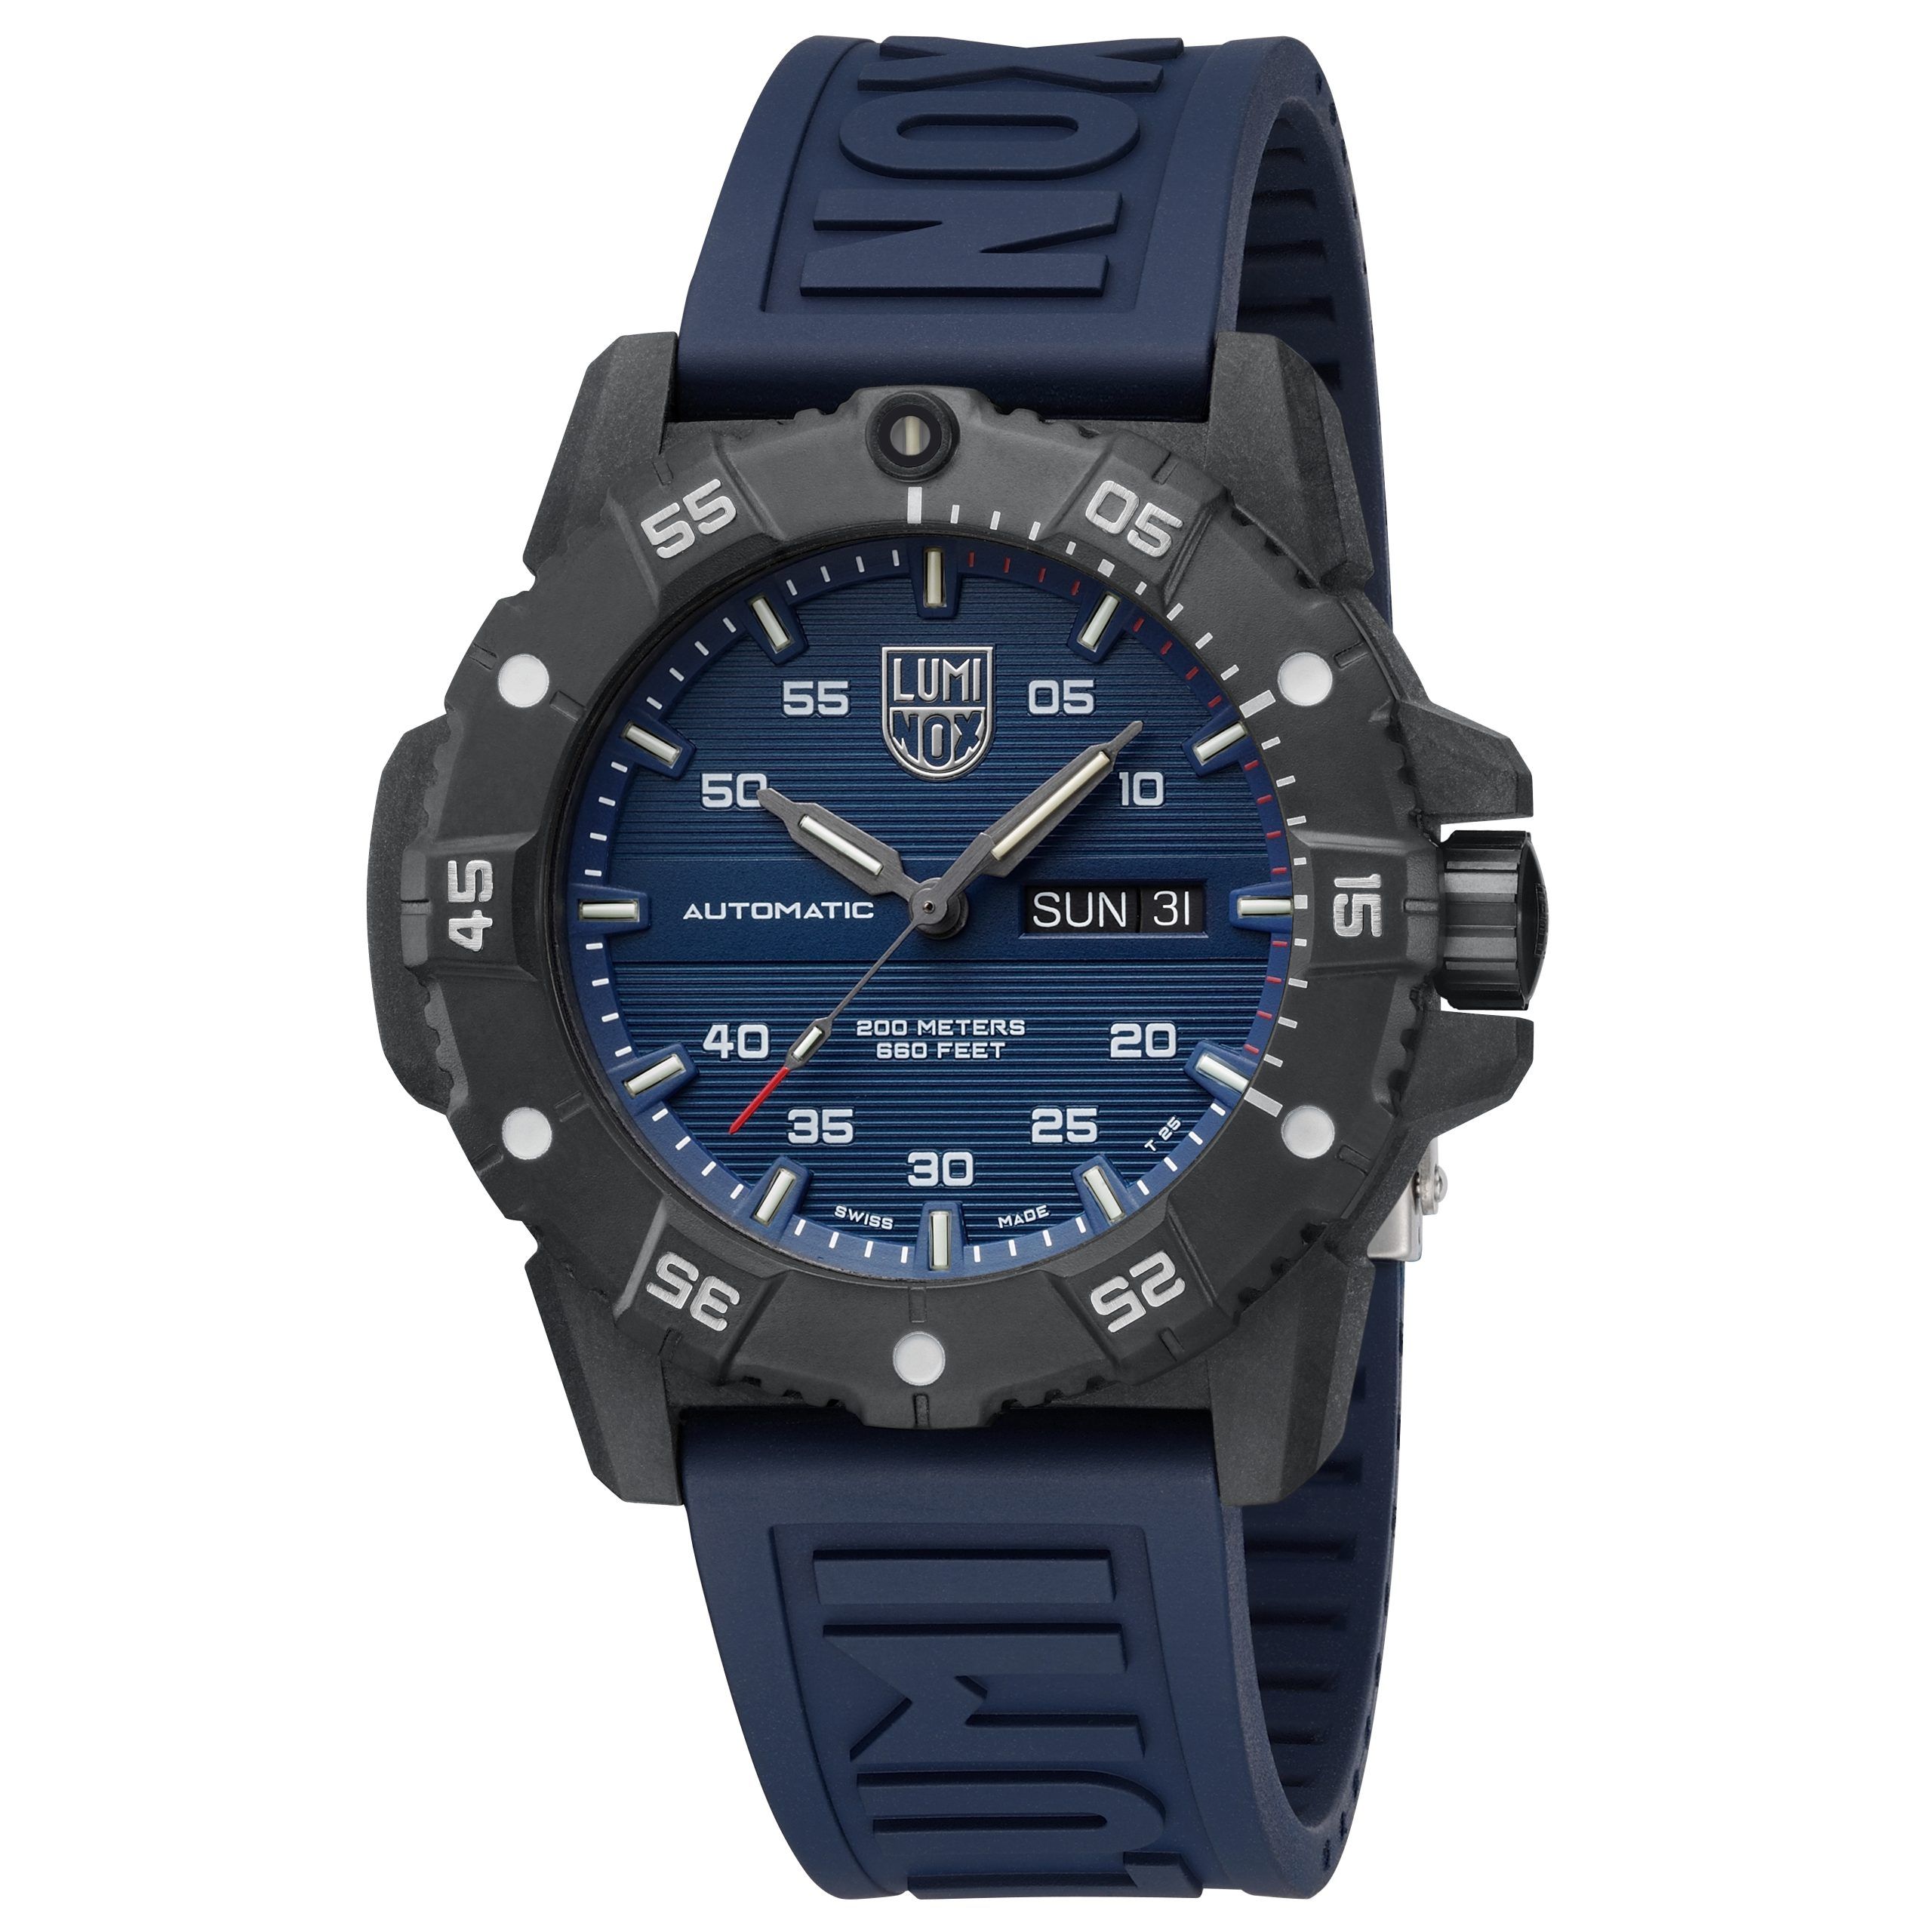 For Modern Adventurers: The Luminox Master Carbon SEAL Automatic